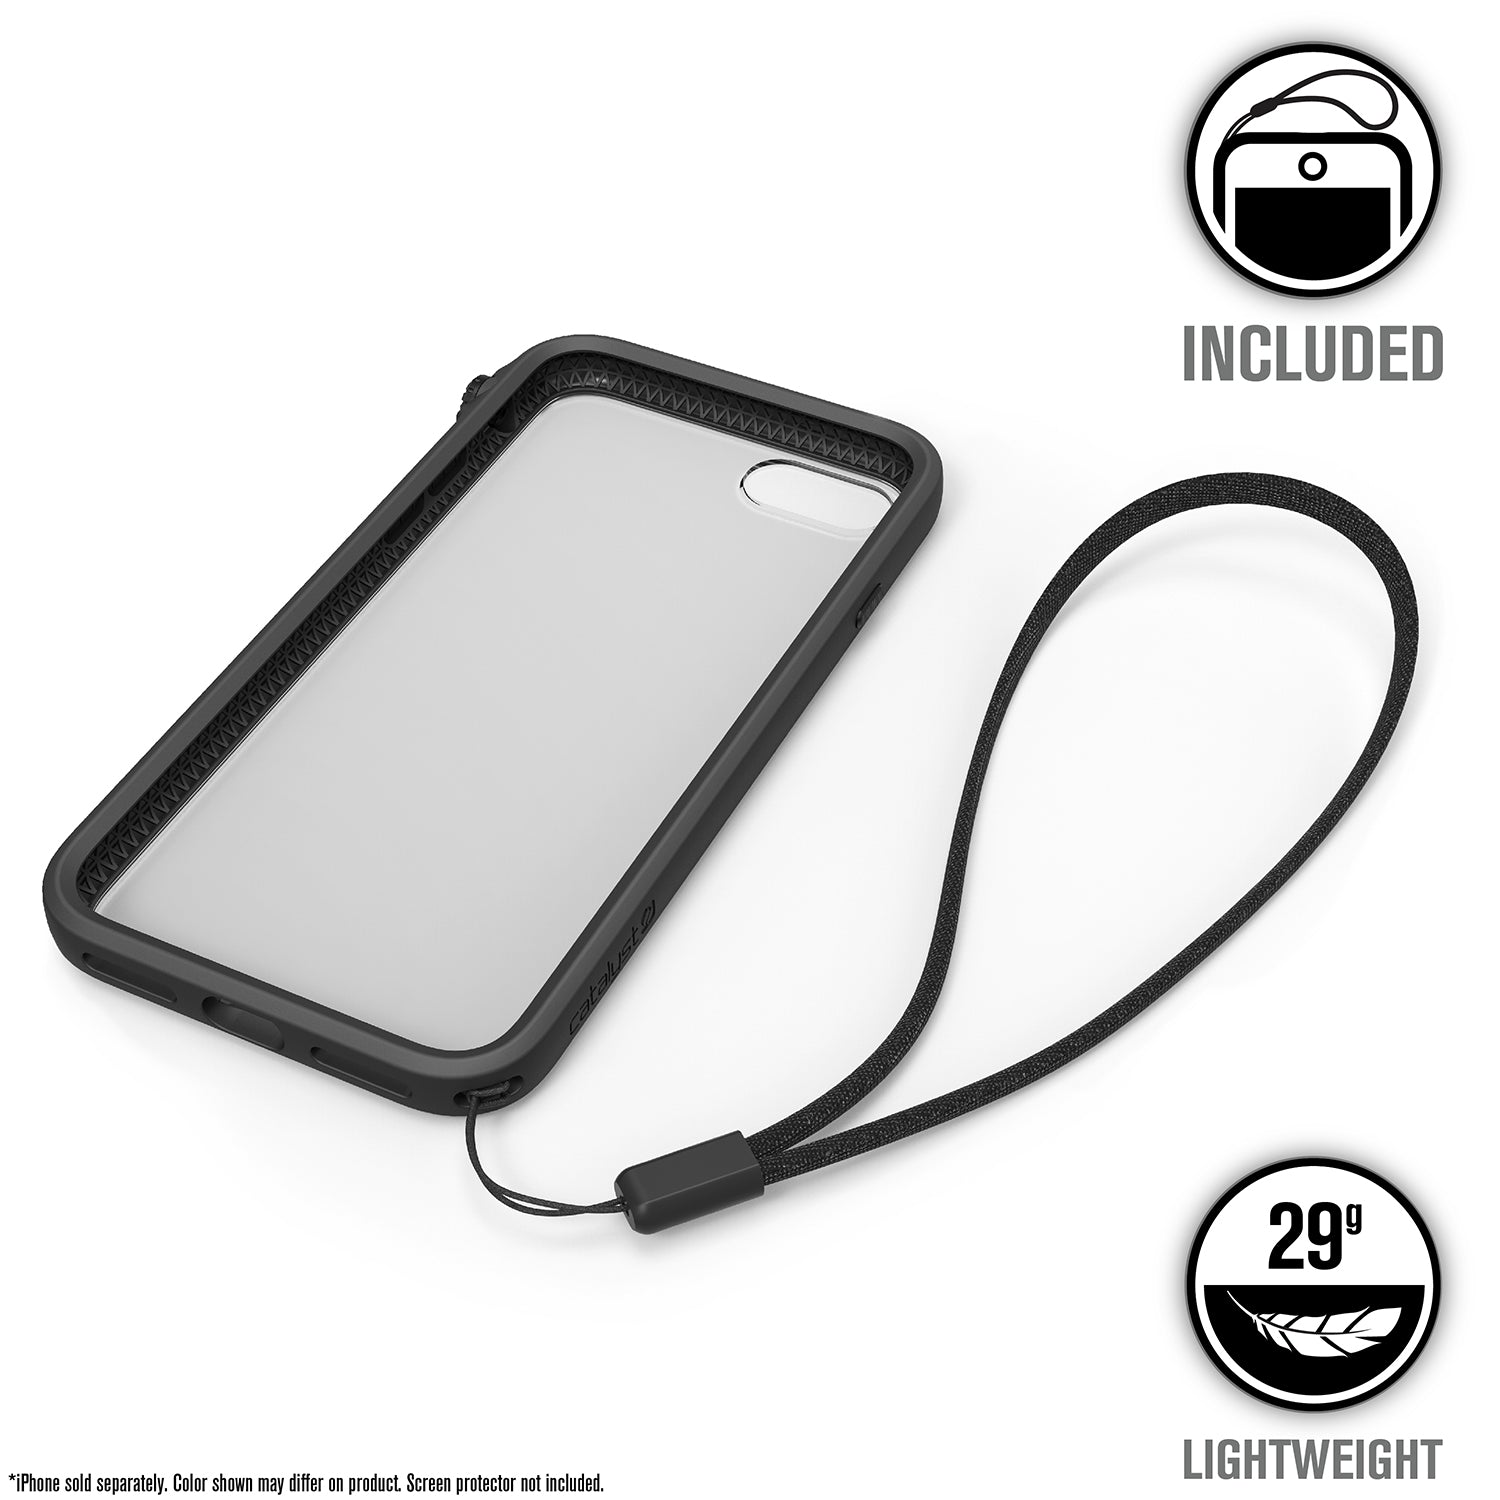 Catalyst iphone 8/7 impact protection case showing  the back view of the case with lanyard attached in a stealth black colorway text reads included 29g lightweight